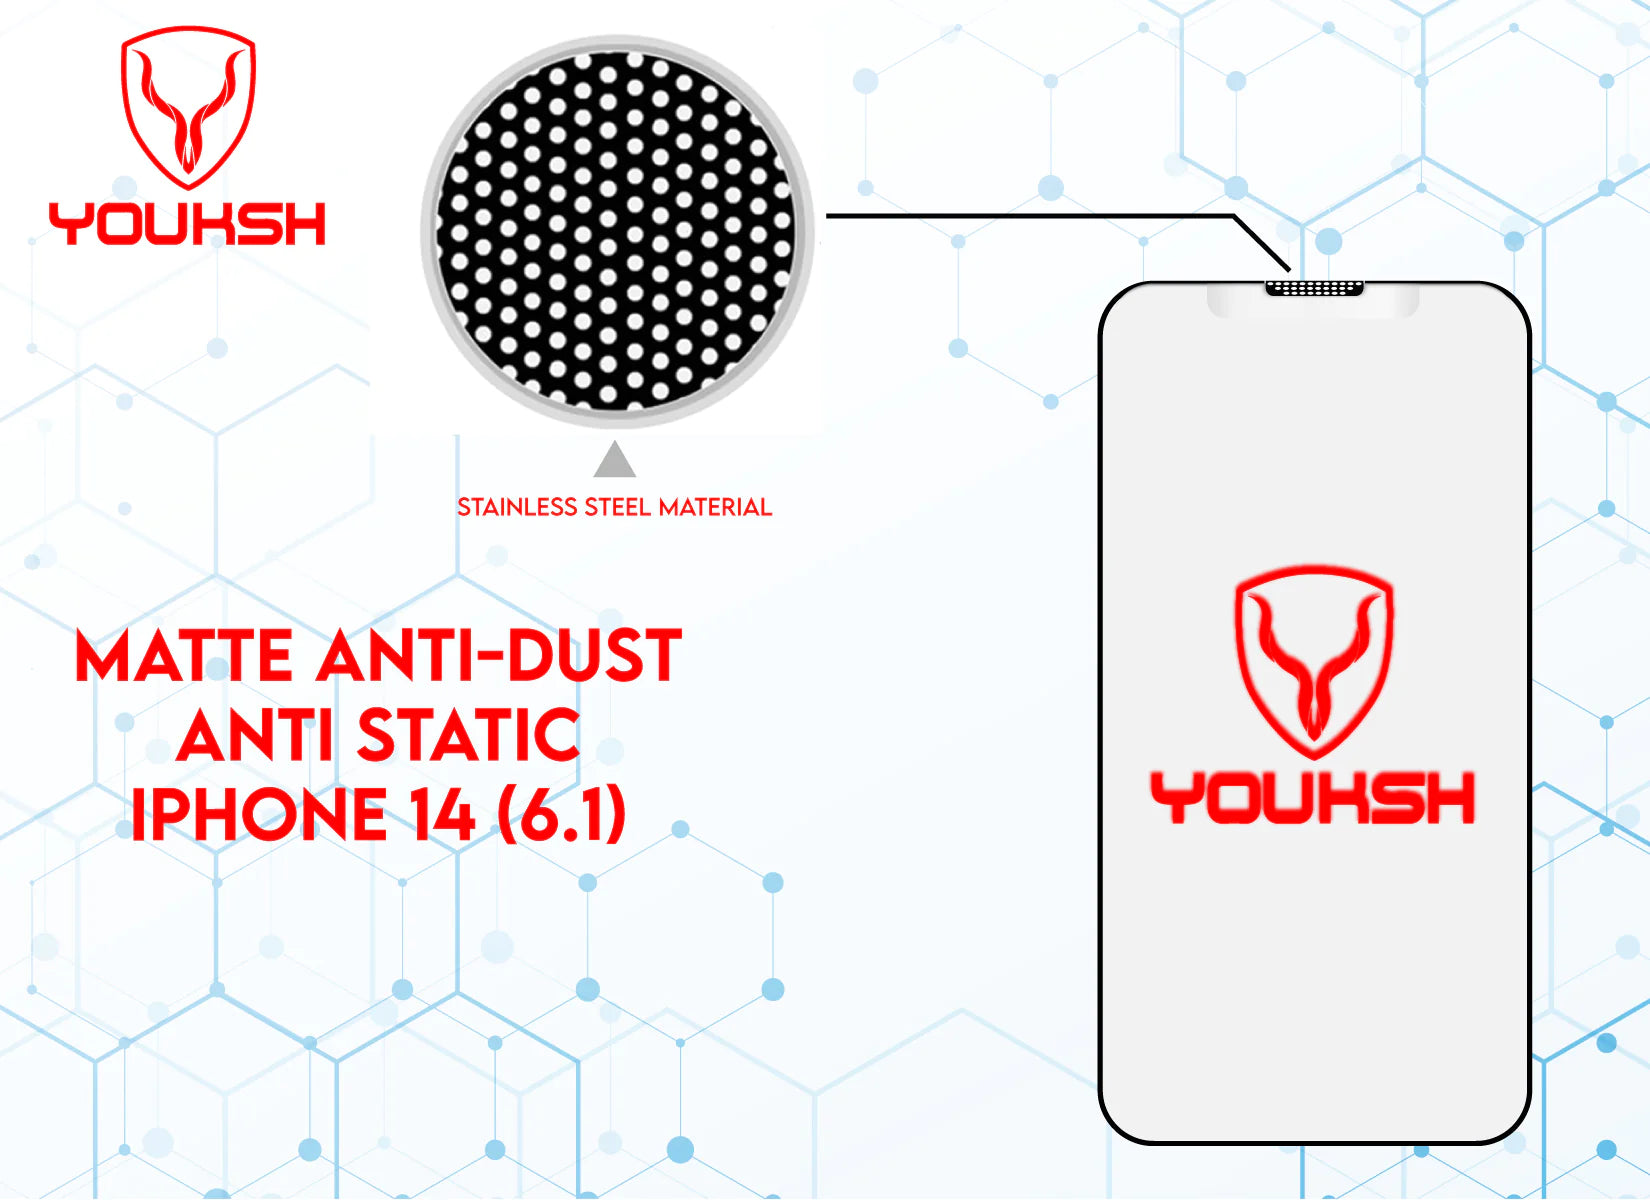 YOUKSH Apple iPhone 14 Anti Static Glass Protector With YOUKSH Installation Kit